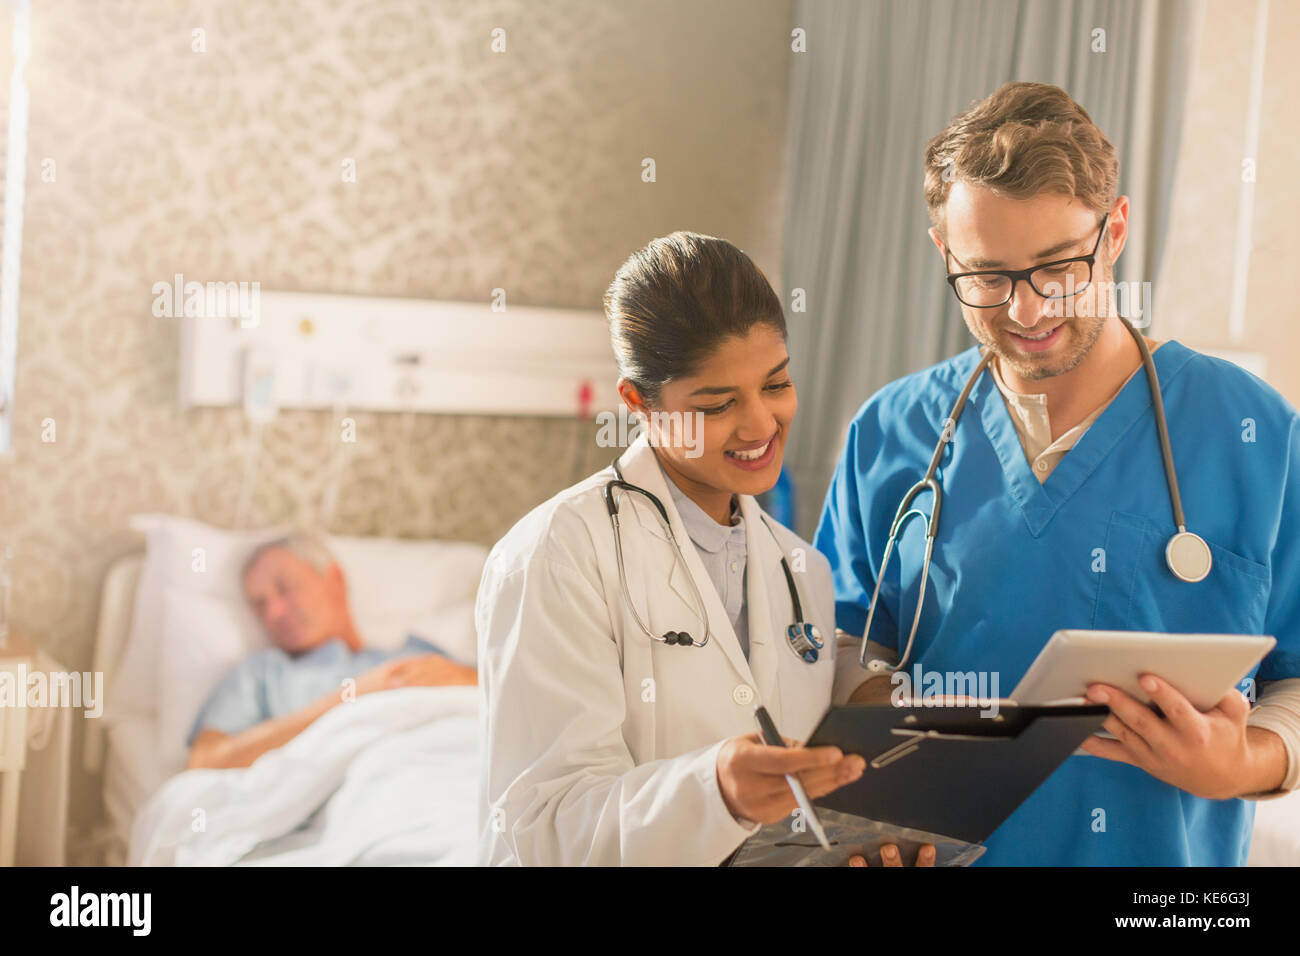 Female doctor and male nurse making rounds, using digital tablet and clipboard in hospital Stock Photo